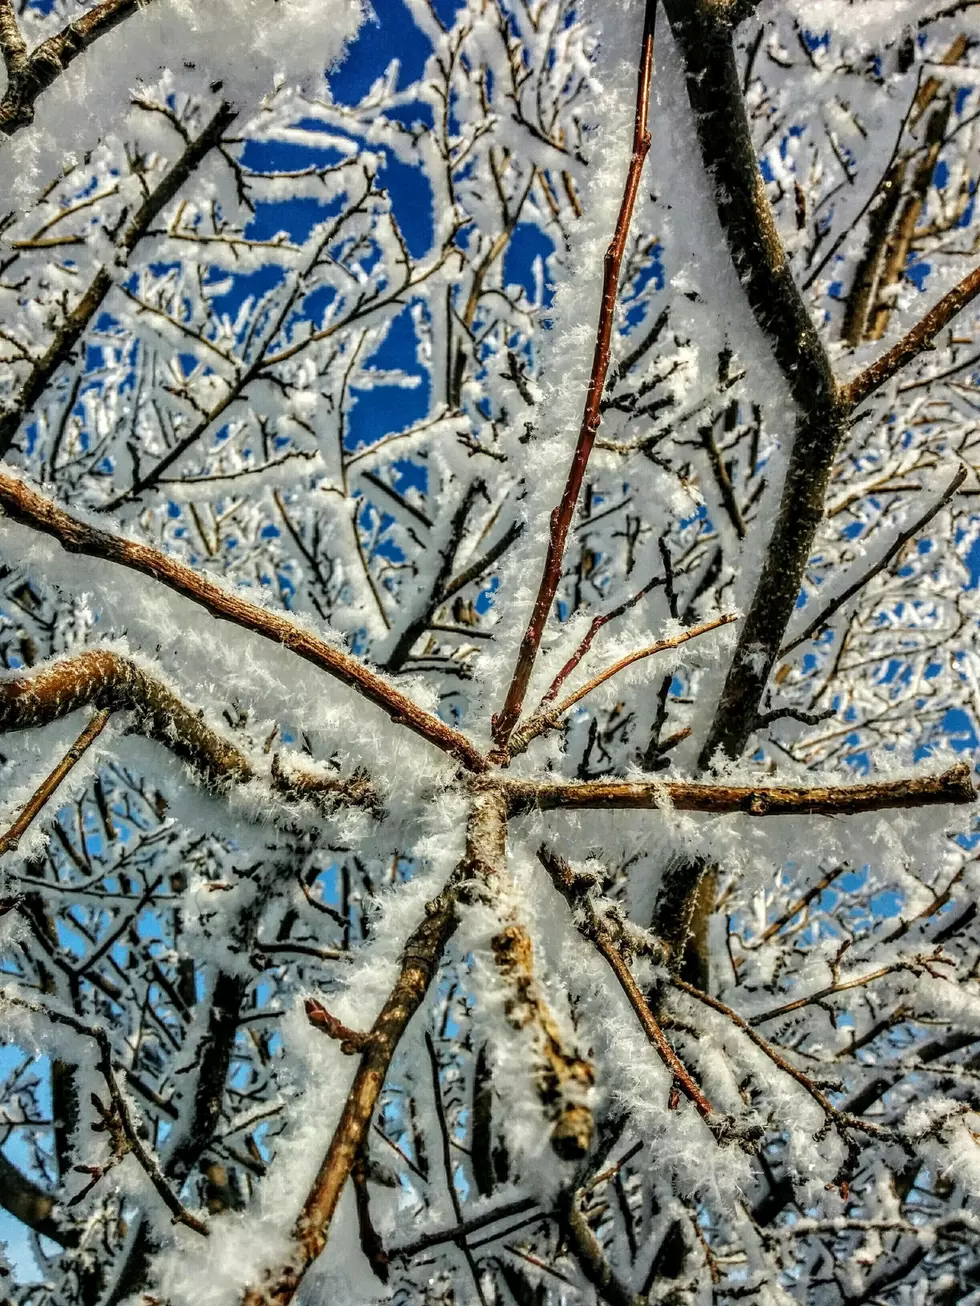 34 Awe Inspiring Pictures Of Hoarfrost In Twin Falls [IMAGES]